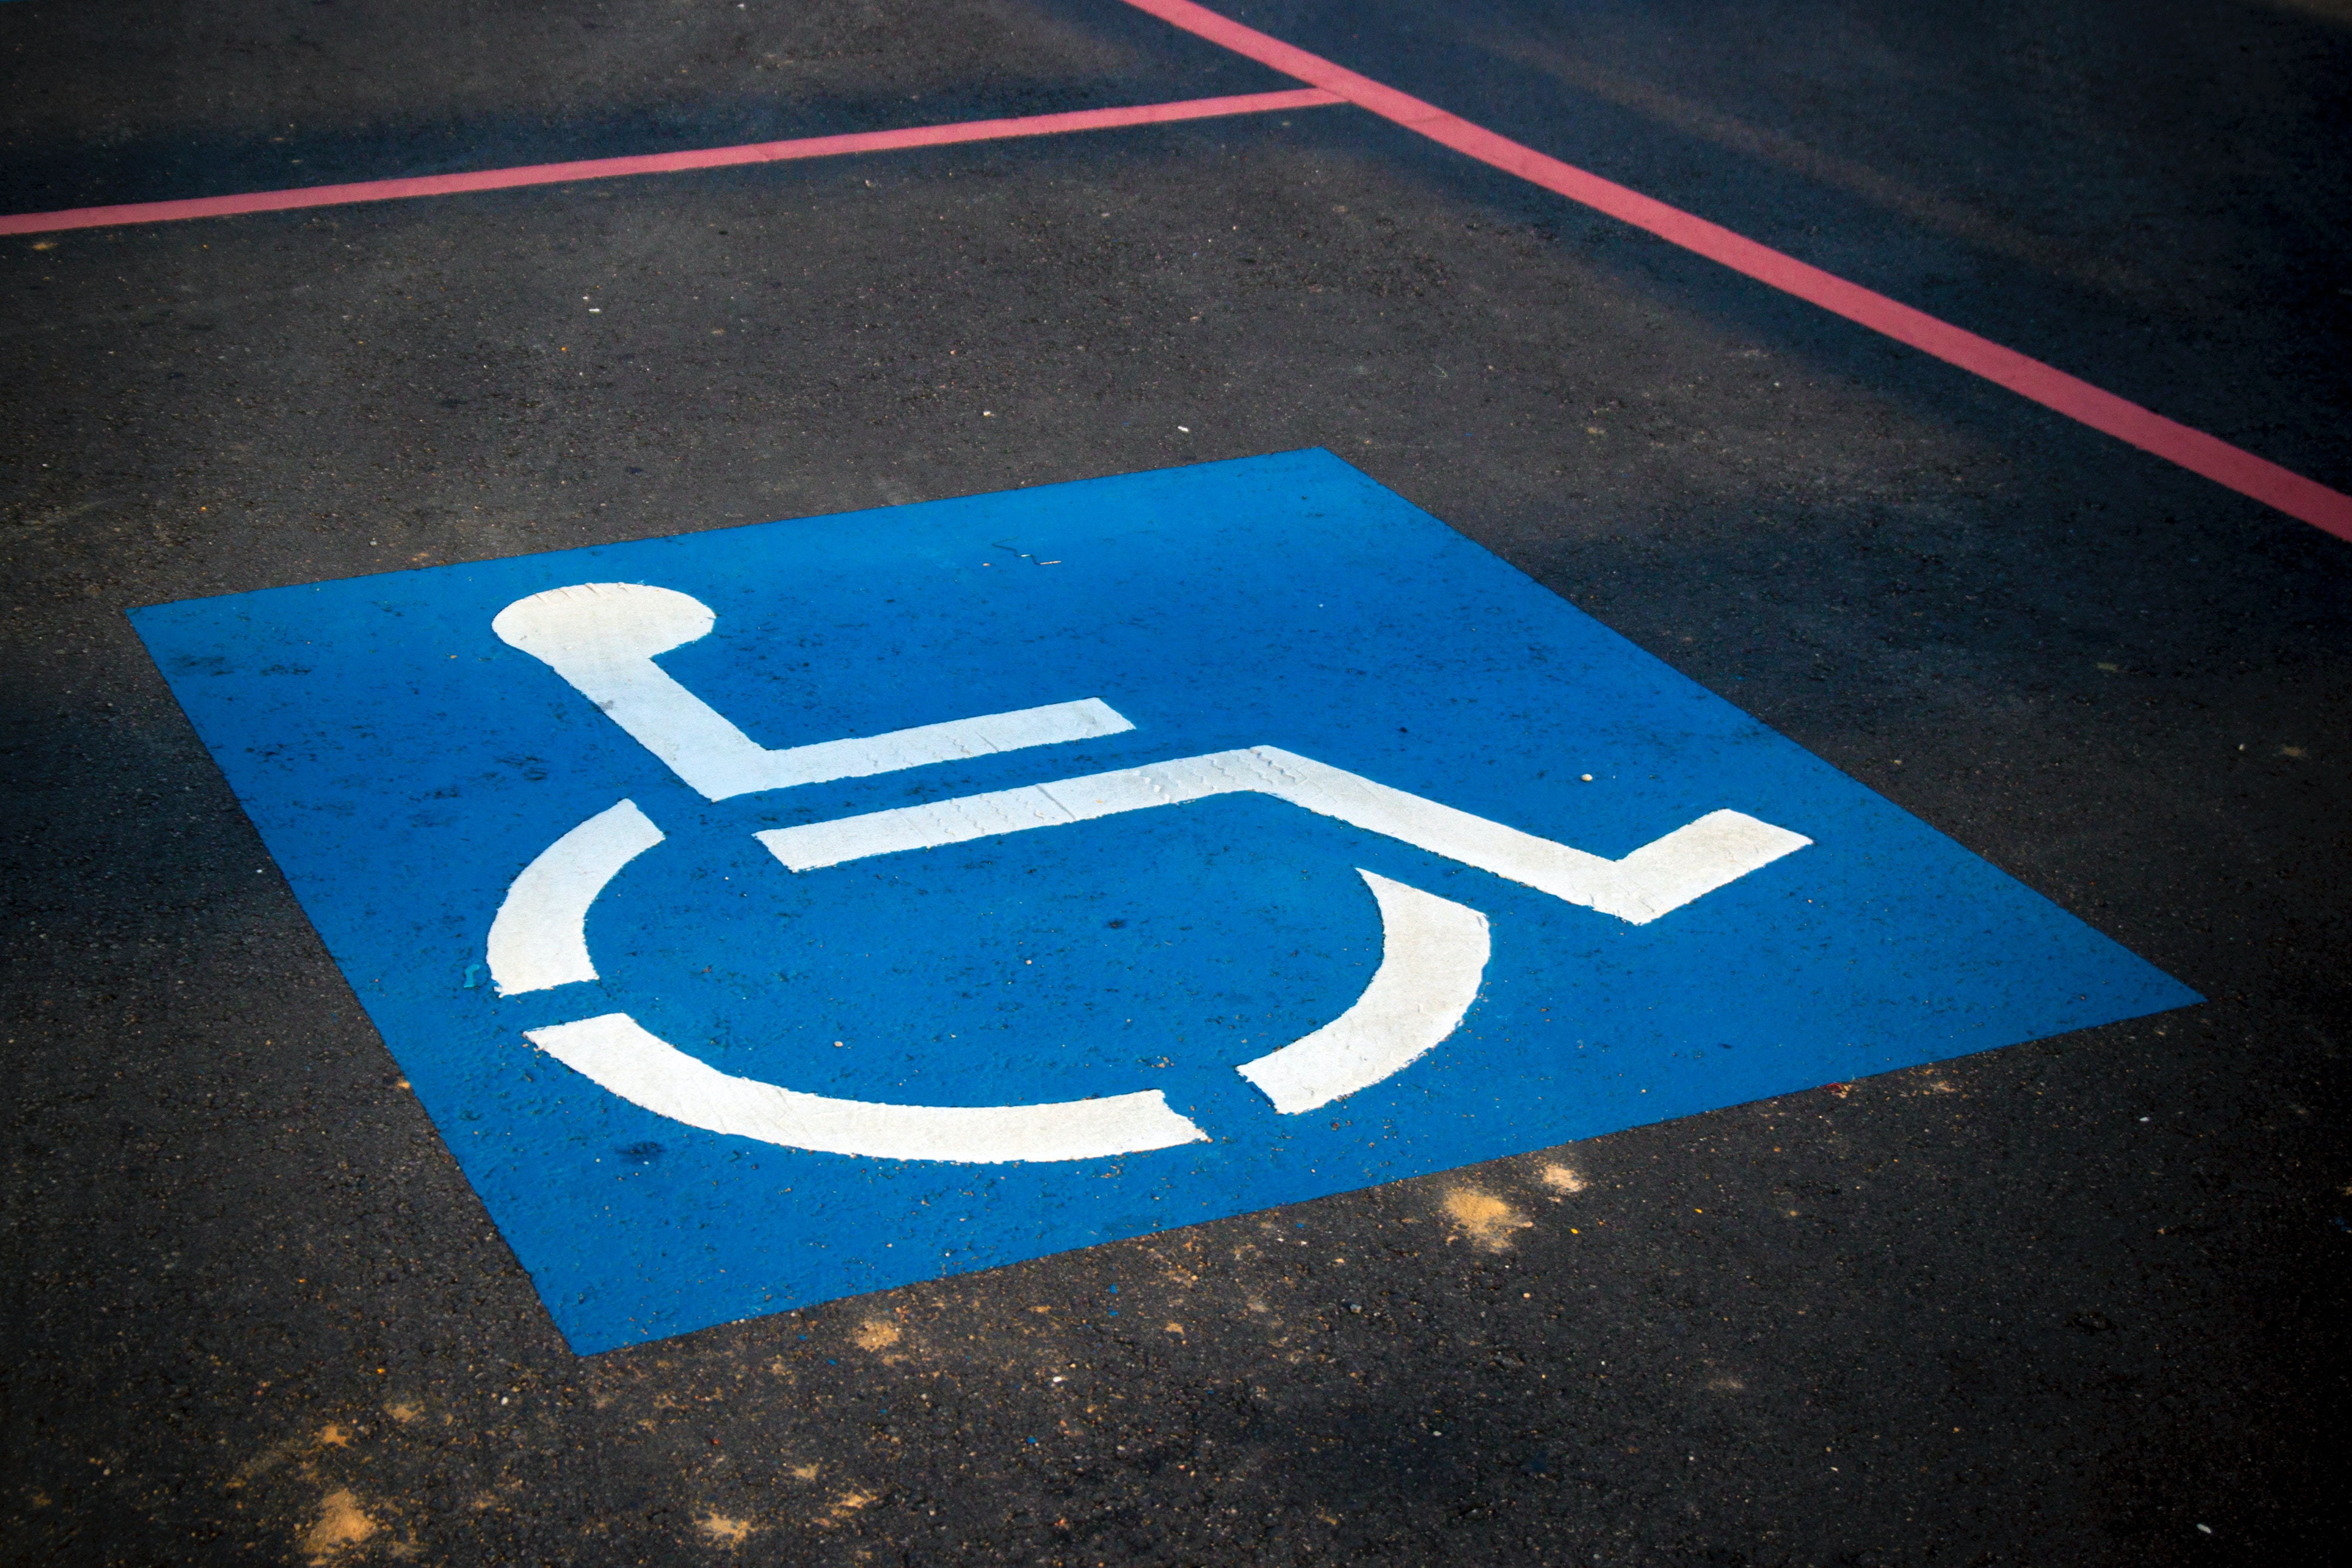 Accessibility - Photo by AbsolutVision on Unsplash